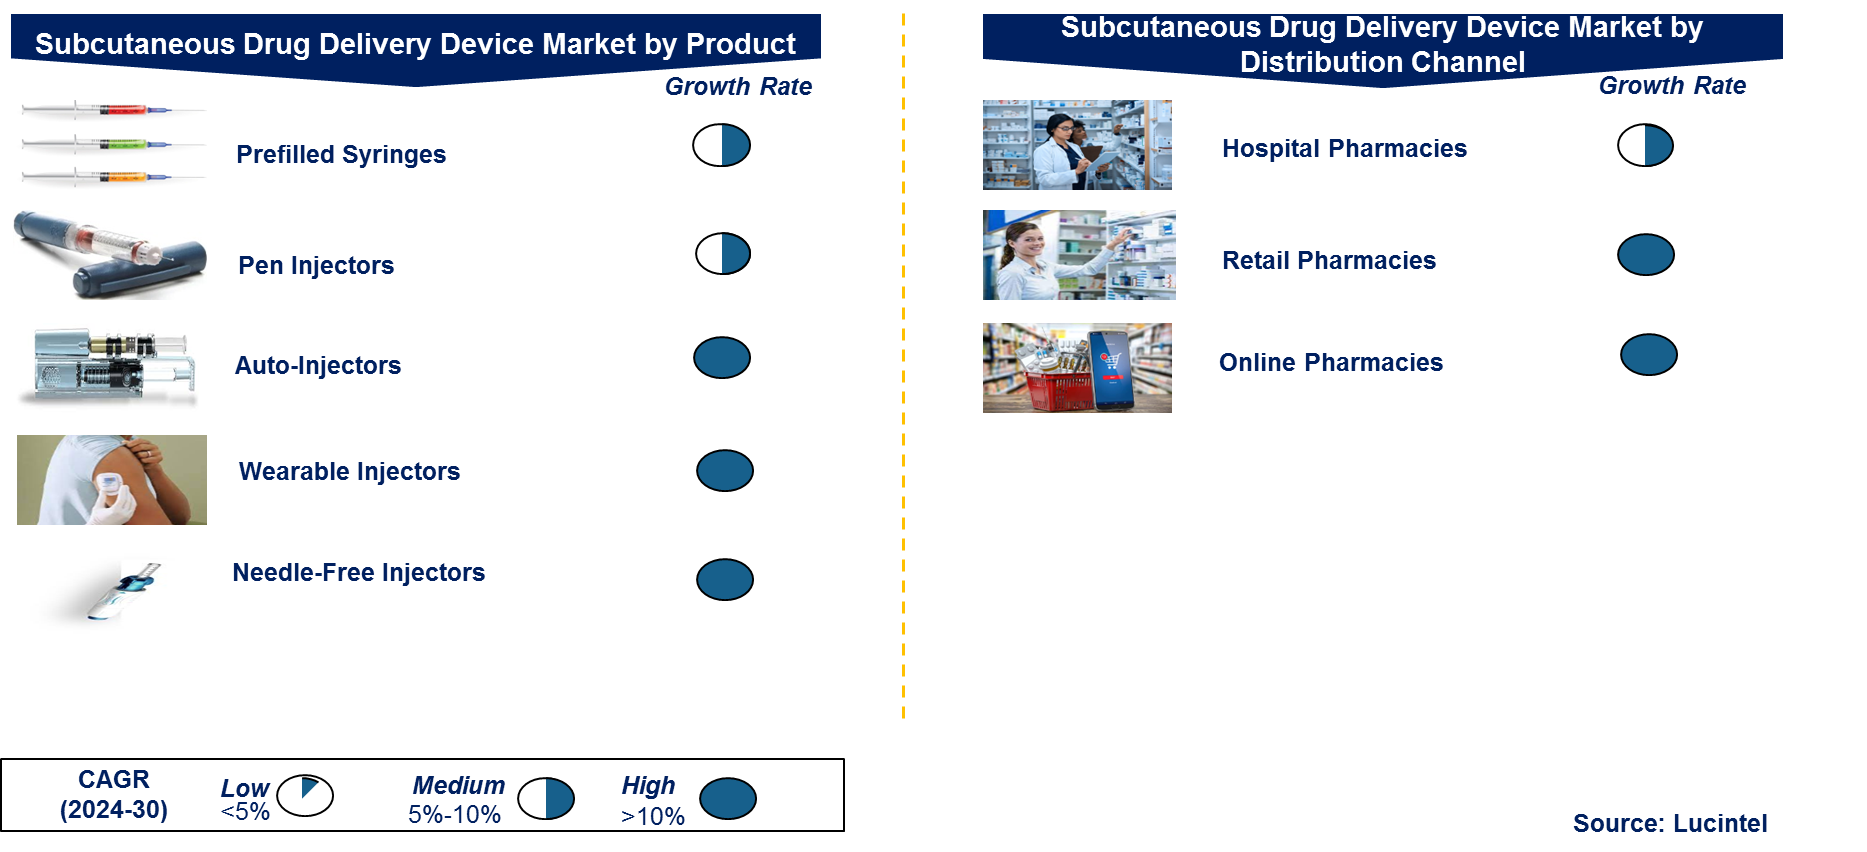 Subcutaneous Drug Delivery Device Market by Segments